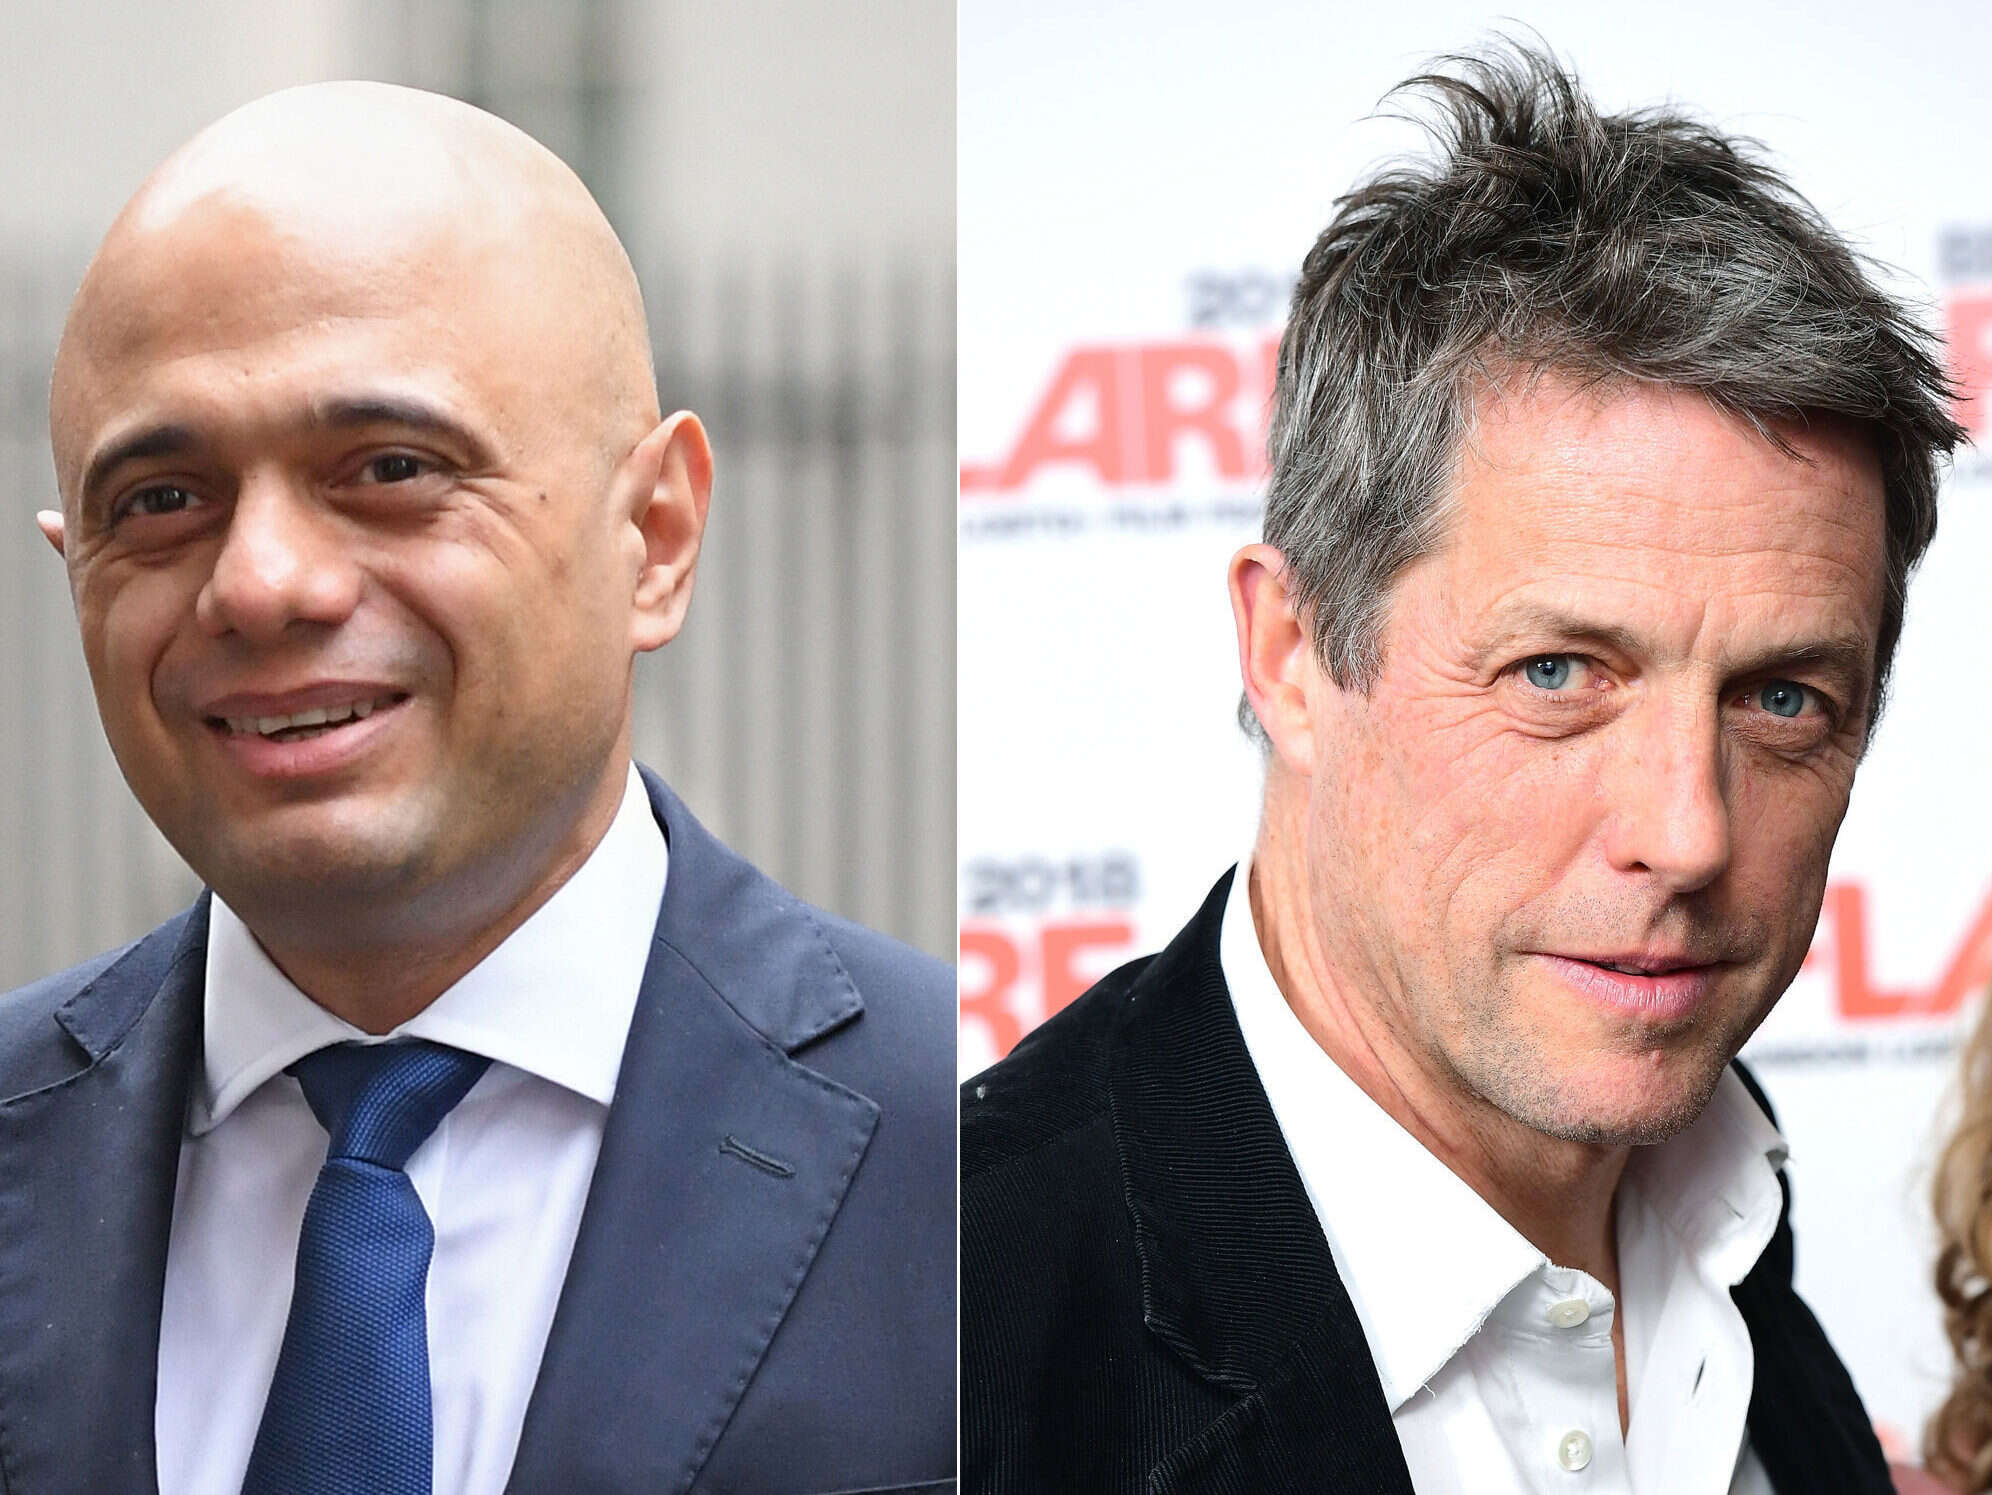 Hacked Off's Hugh Grant refused to shake Sajid Javid's hand over past press abuse victims meeting